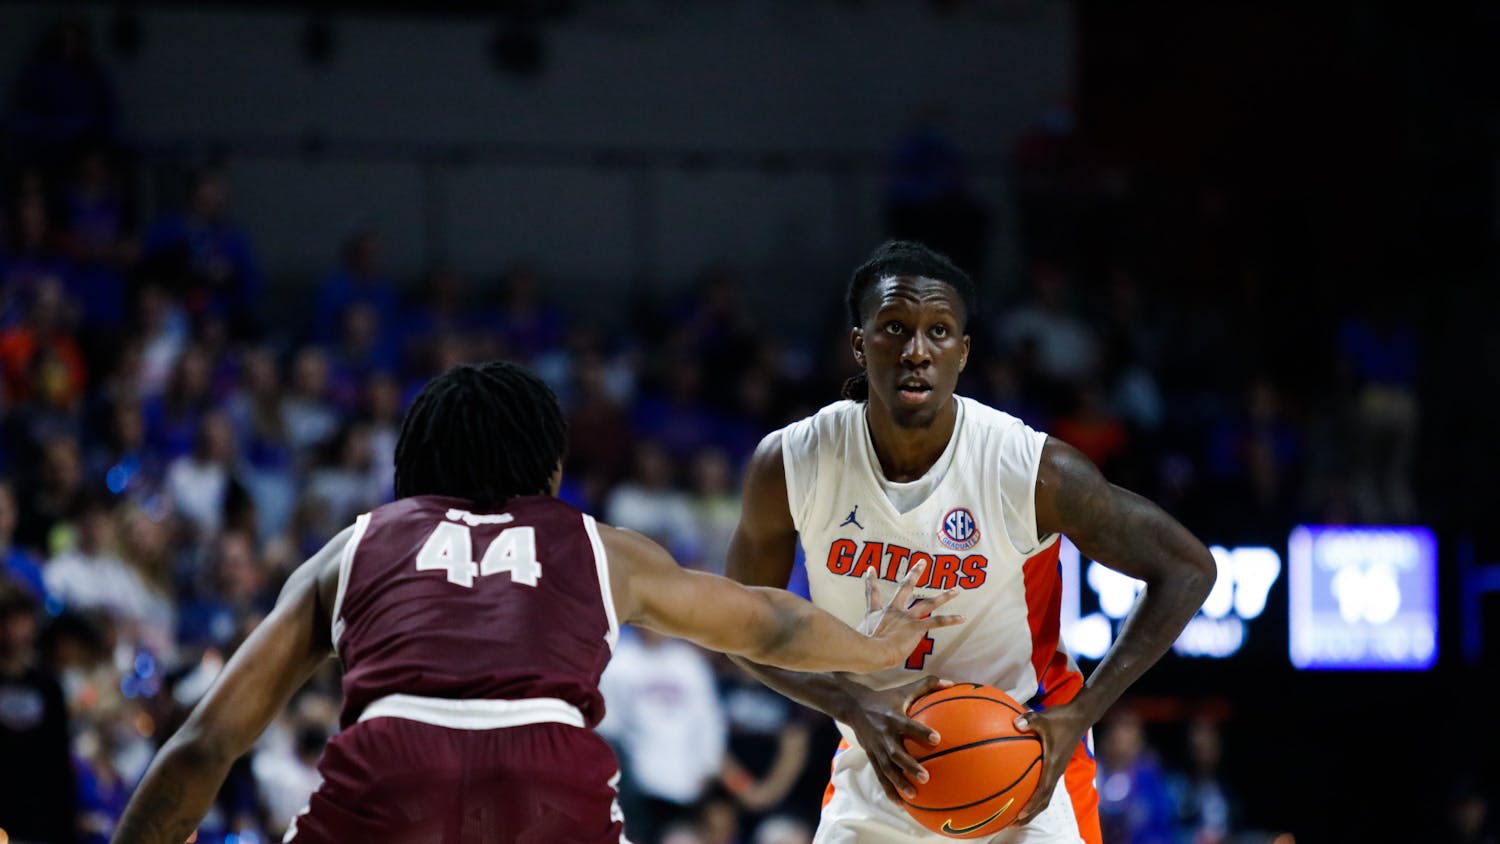 Florida&#x27;s Anthony Duruji holds the ball during a Dec. 6 game against Texas Southern. The senior tallied 14 points in the second half Saturday against Auburn.